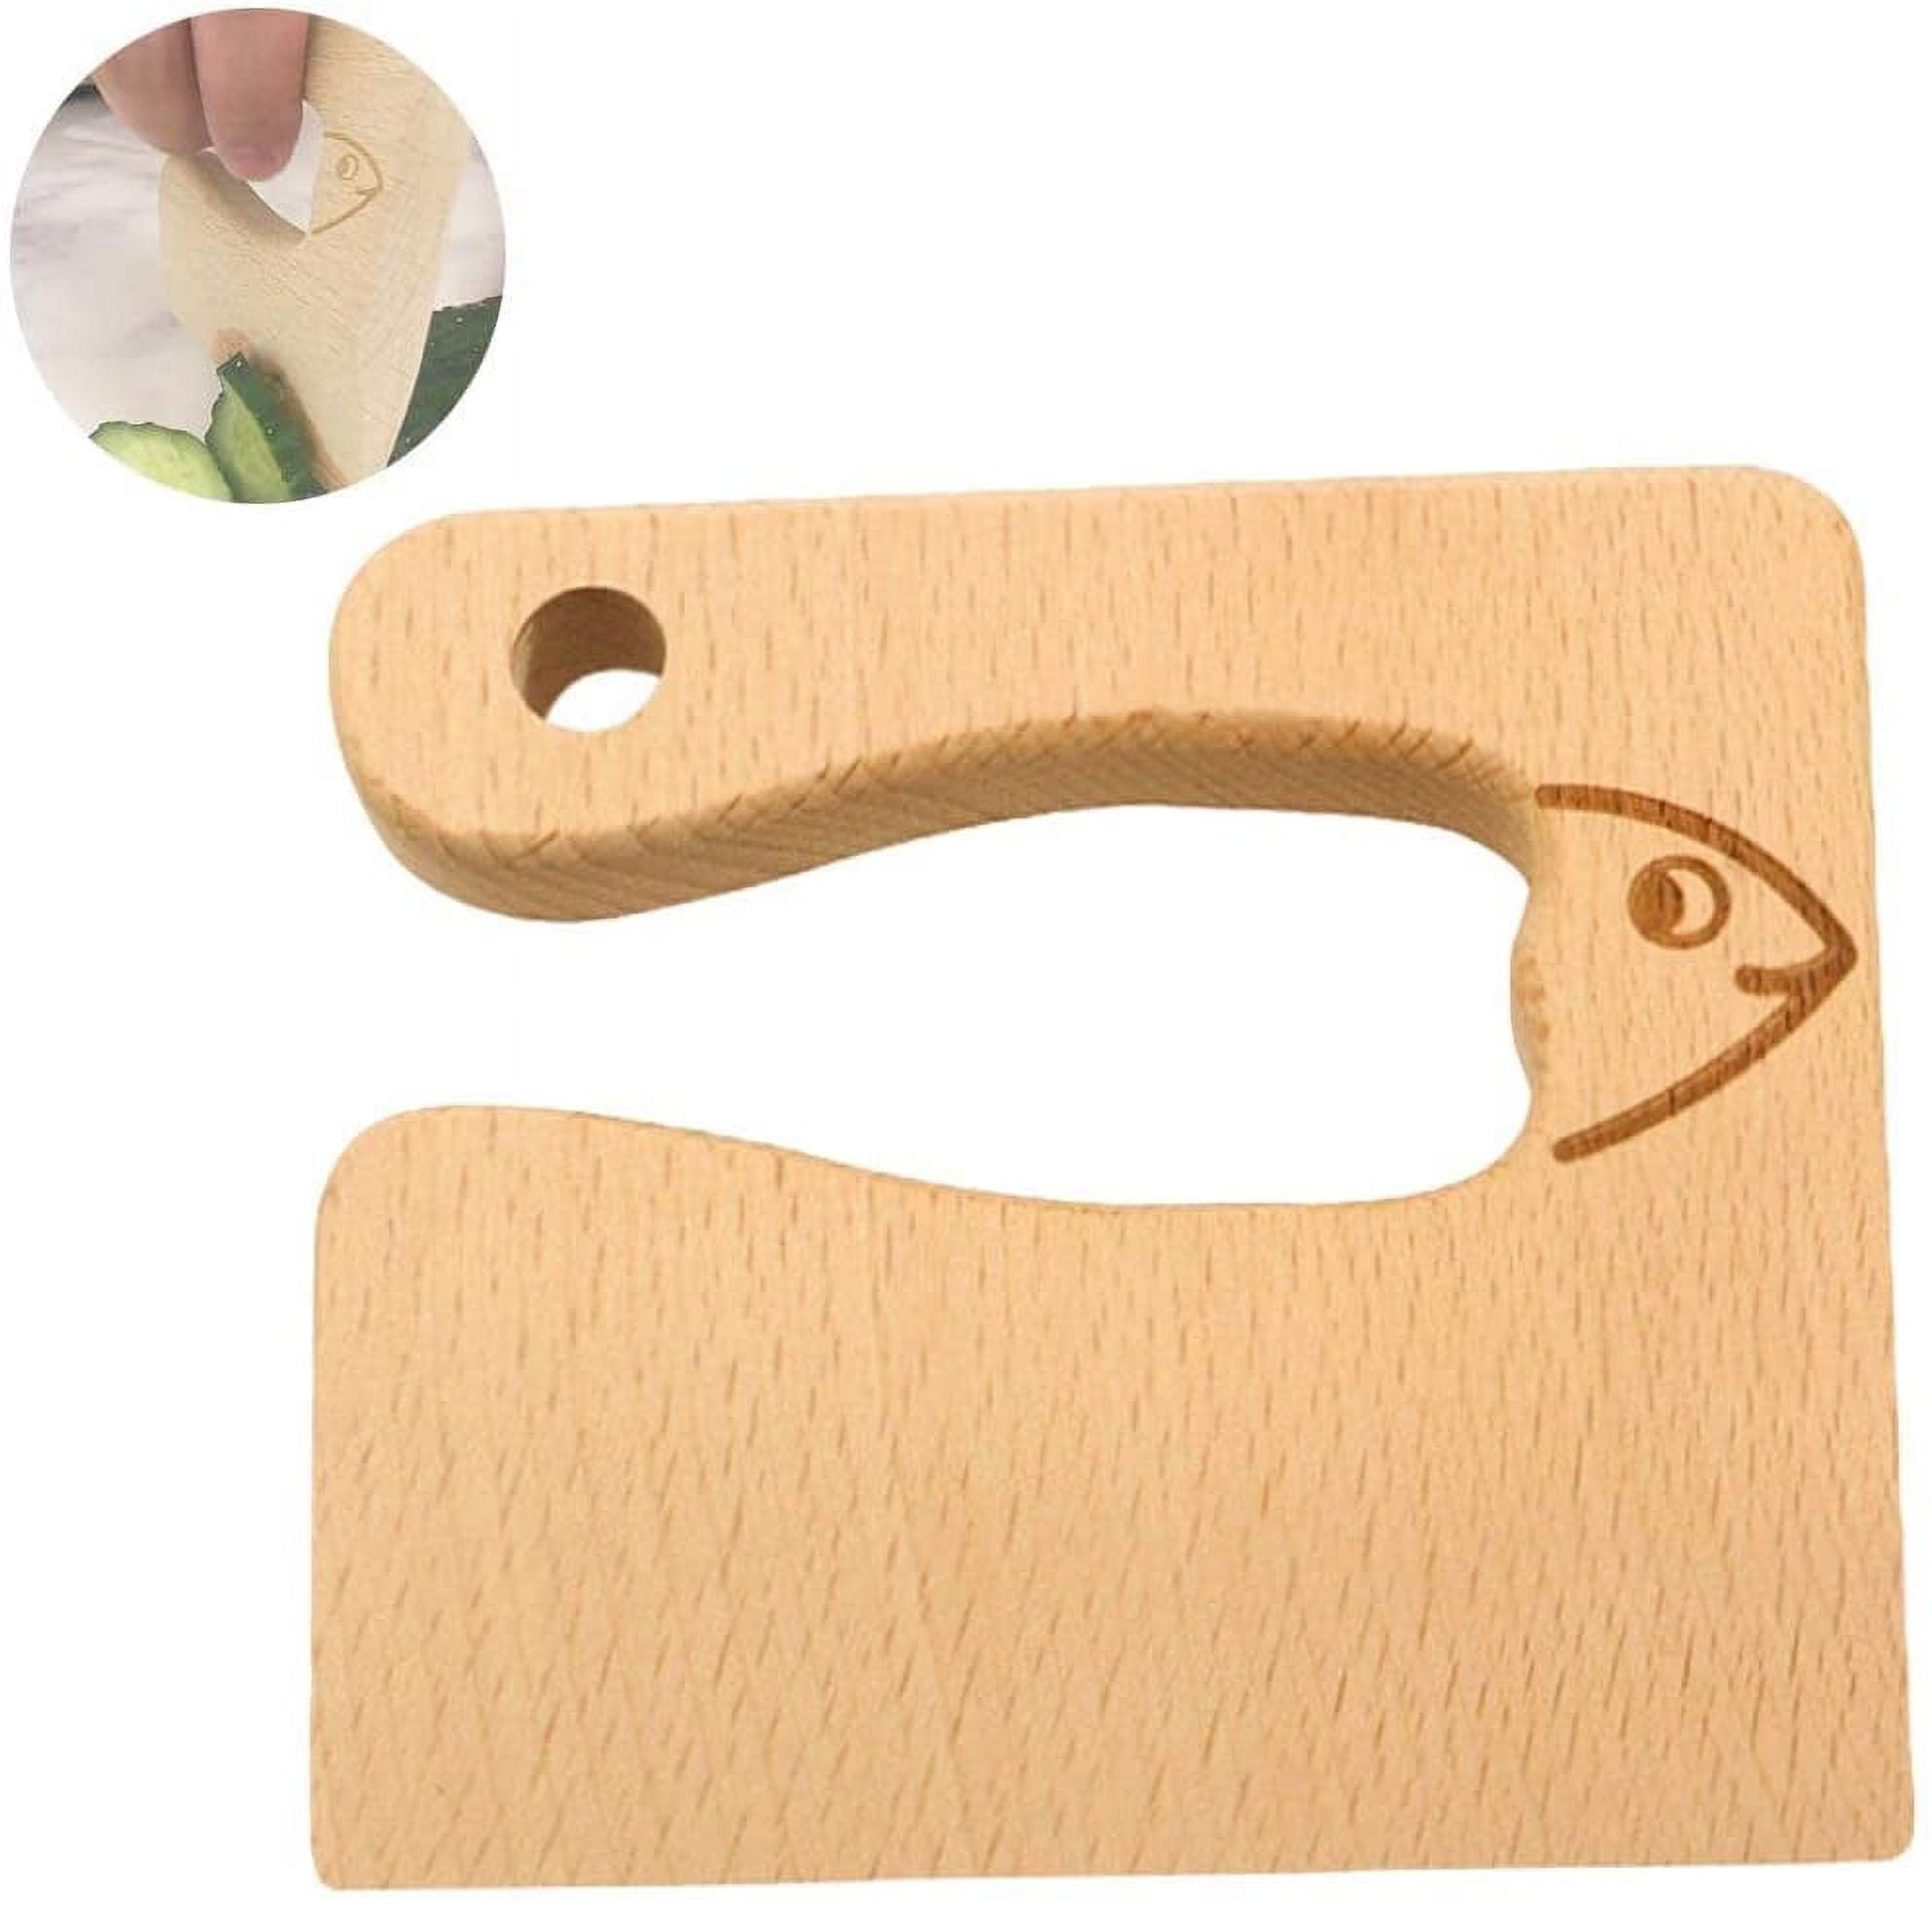 Cutting Board, Safe Wooden Knife, Butter Knife and Whisk for Kids SET,  Toddler Utensil Montessori Toy Knife, Wooden Chopper